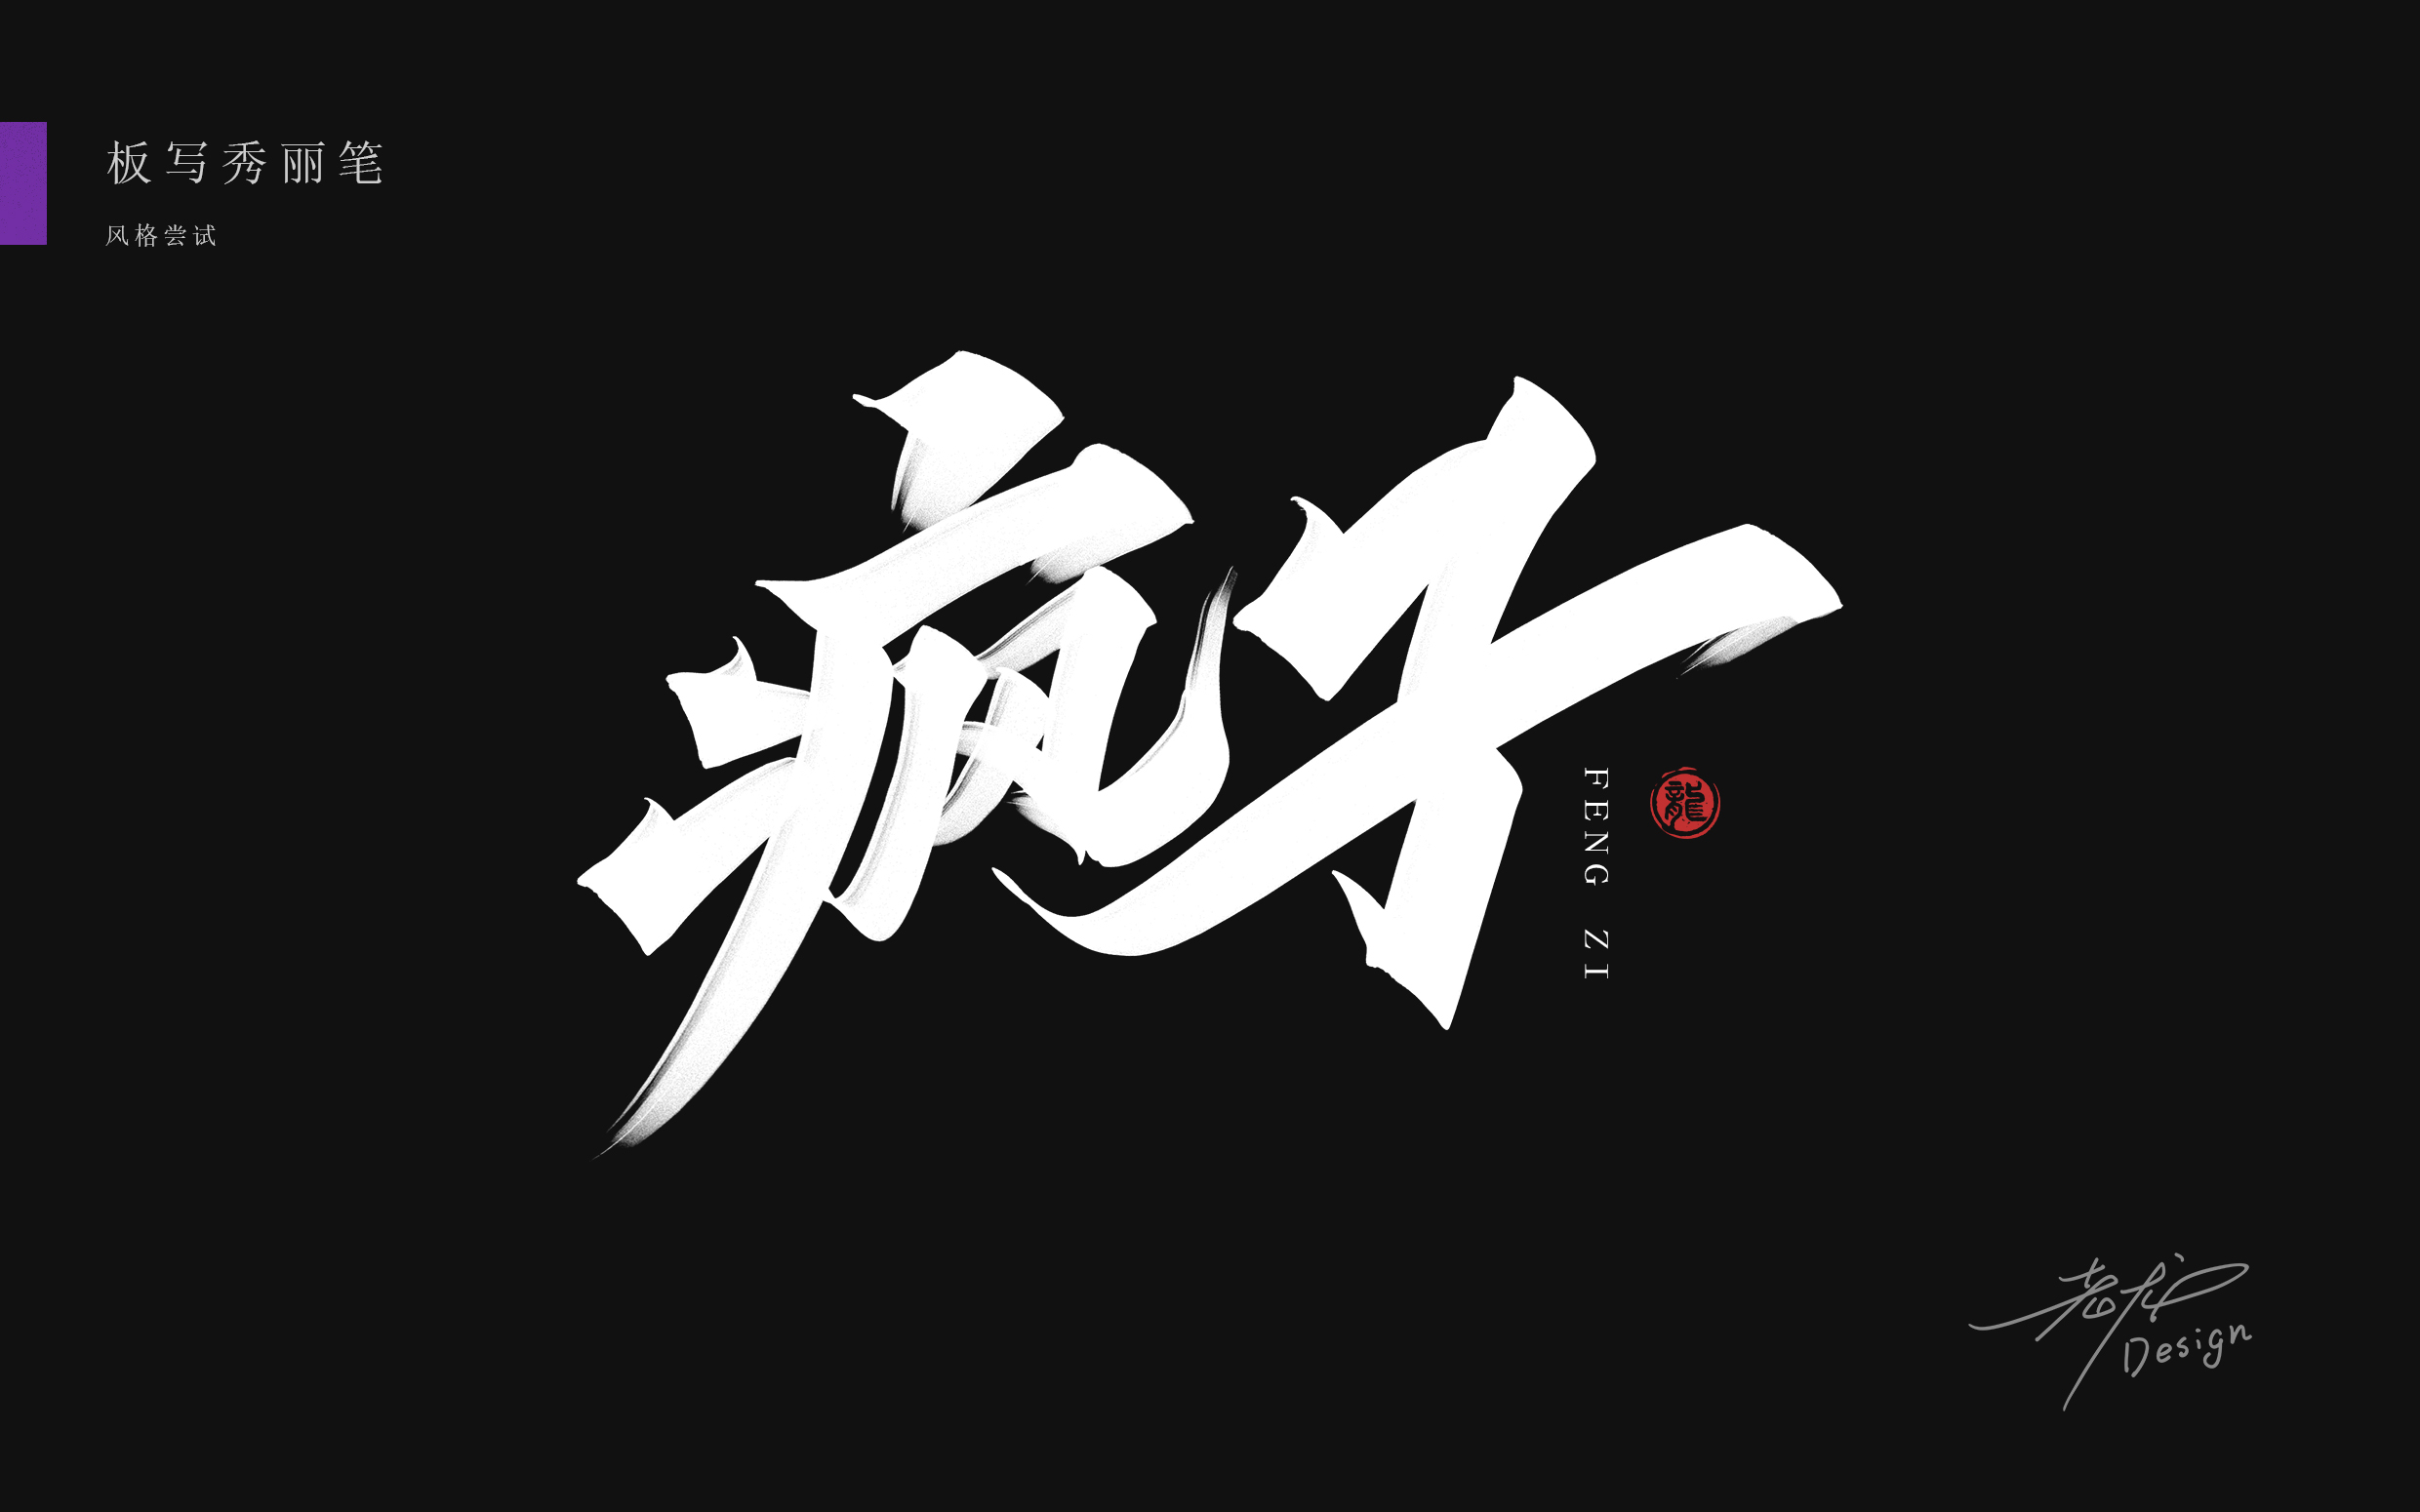 14P Collection of the latest Chinese font design schemes in 2021 #.399